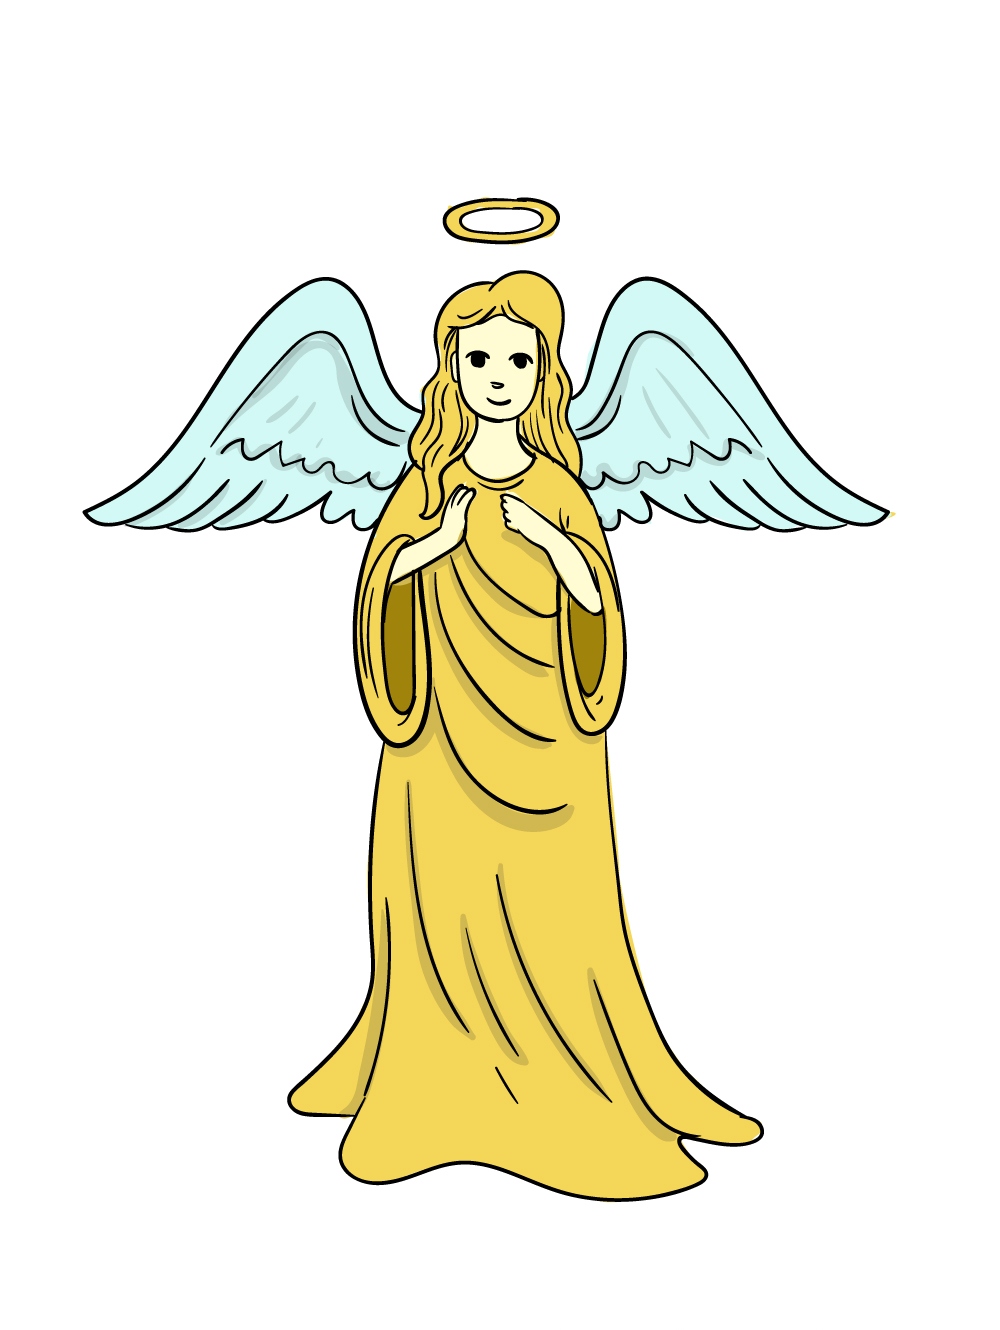 Beautiful Angel Drawing - Easy Step By Step Guide